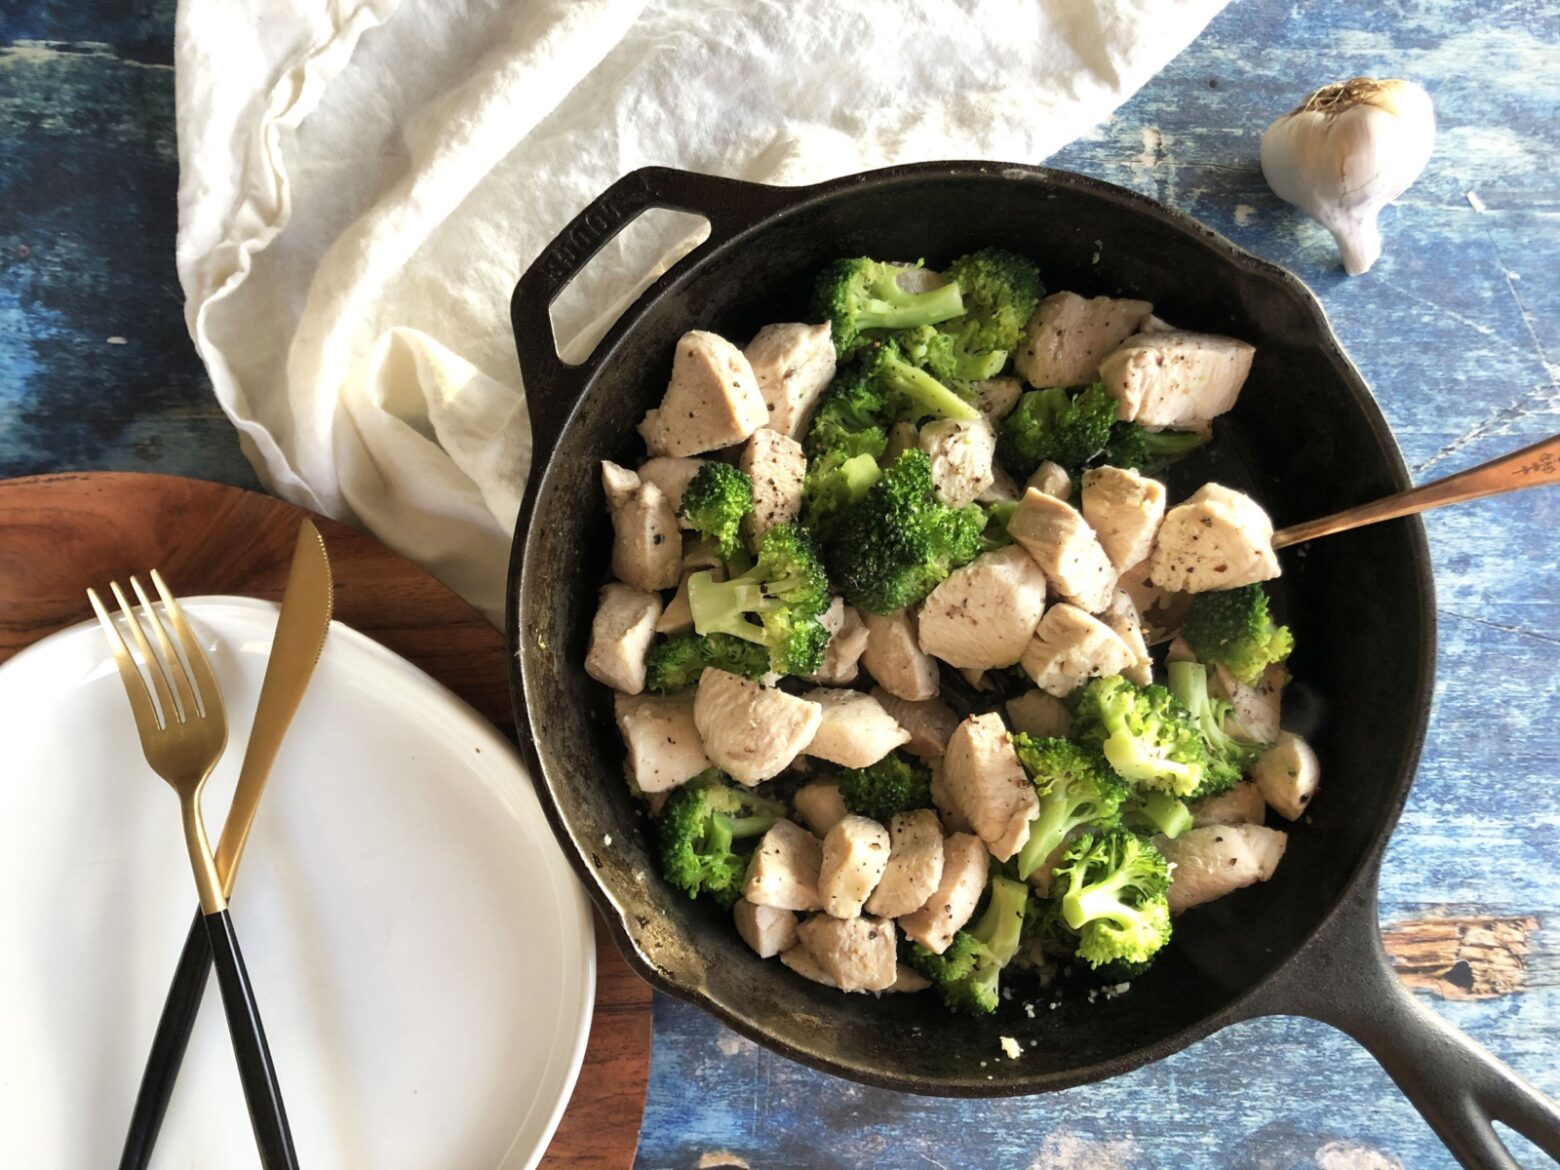 An iron skillet containing stir-fried chicken and broccoli next to an empty white plate with a knife and fork and a bulb of garlic.